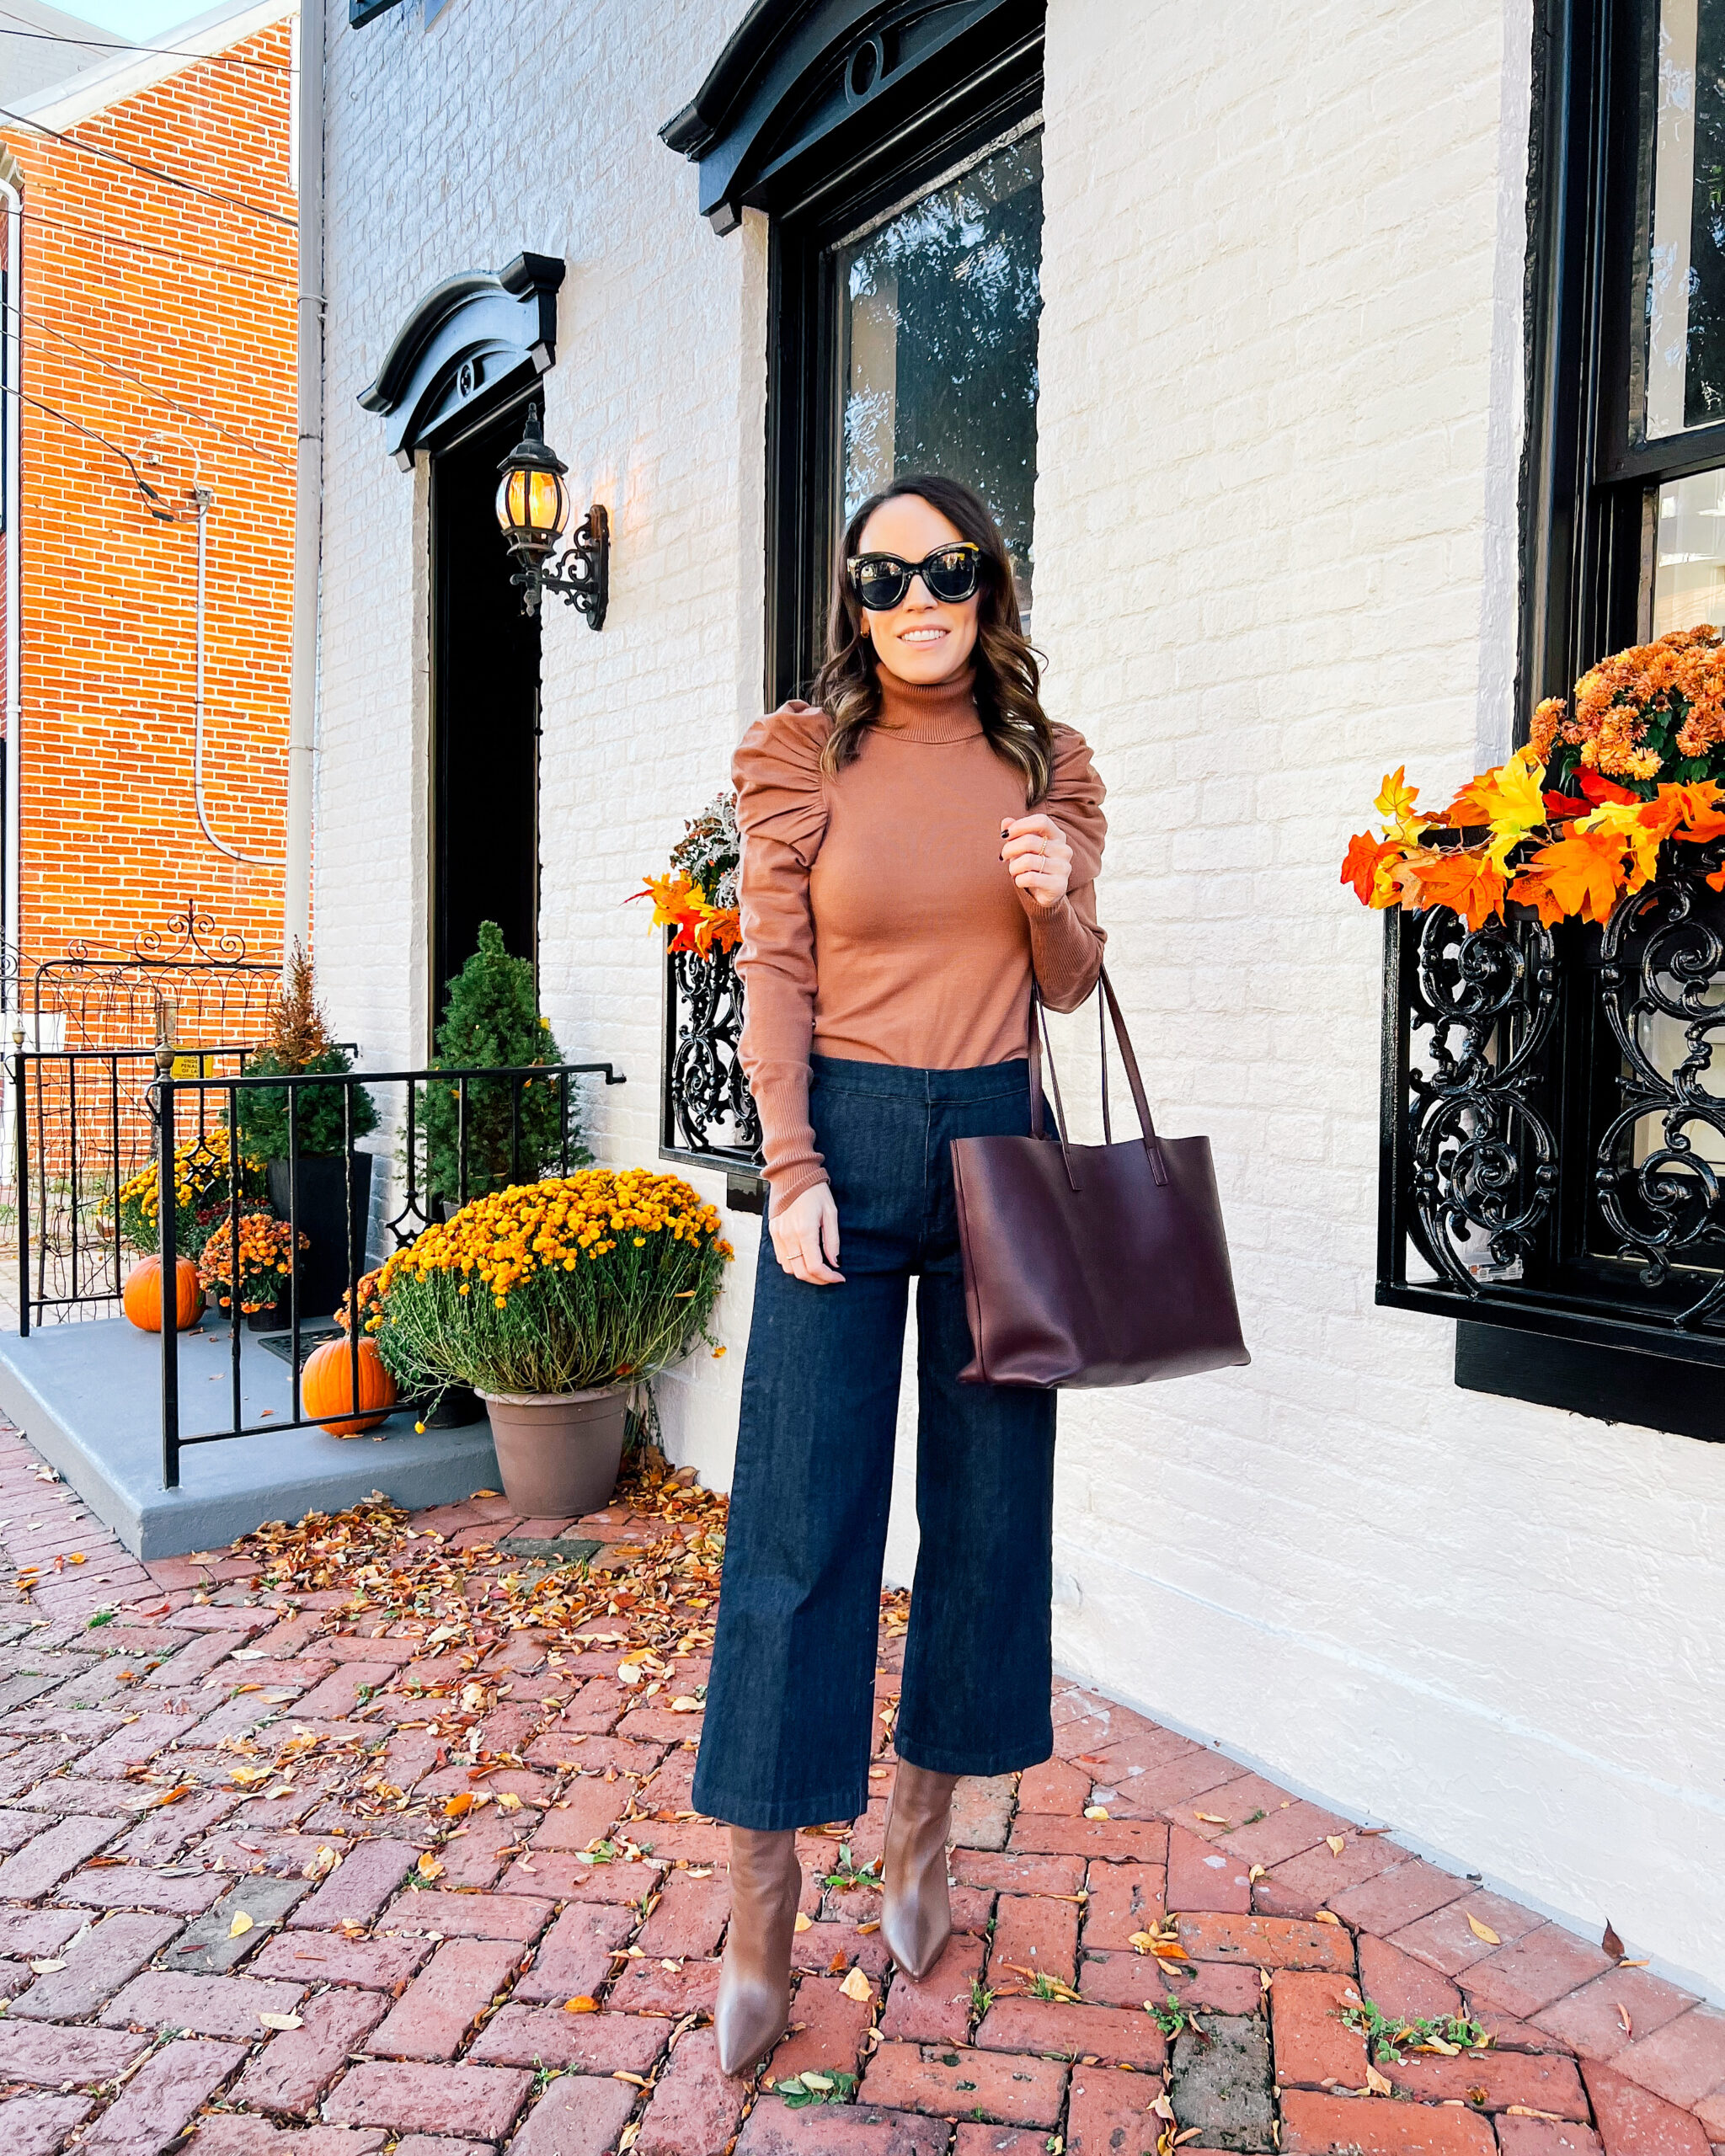 Instagram Round Up - March Looks - According to Blaire